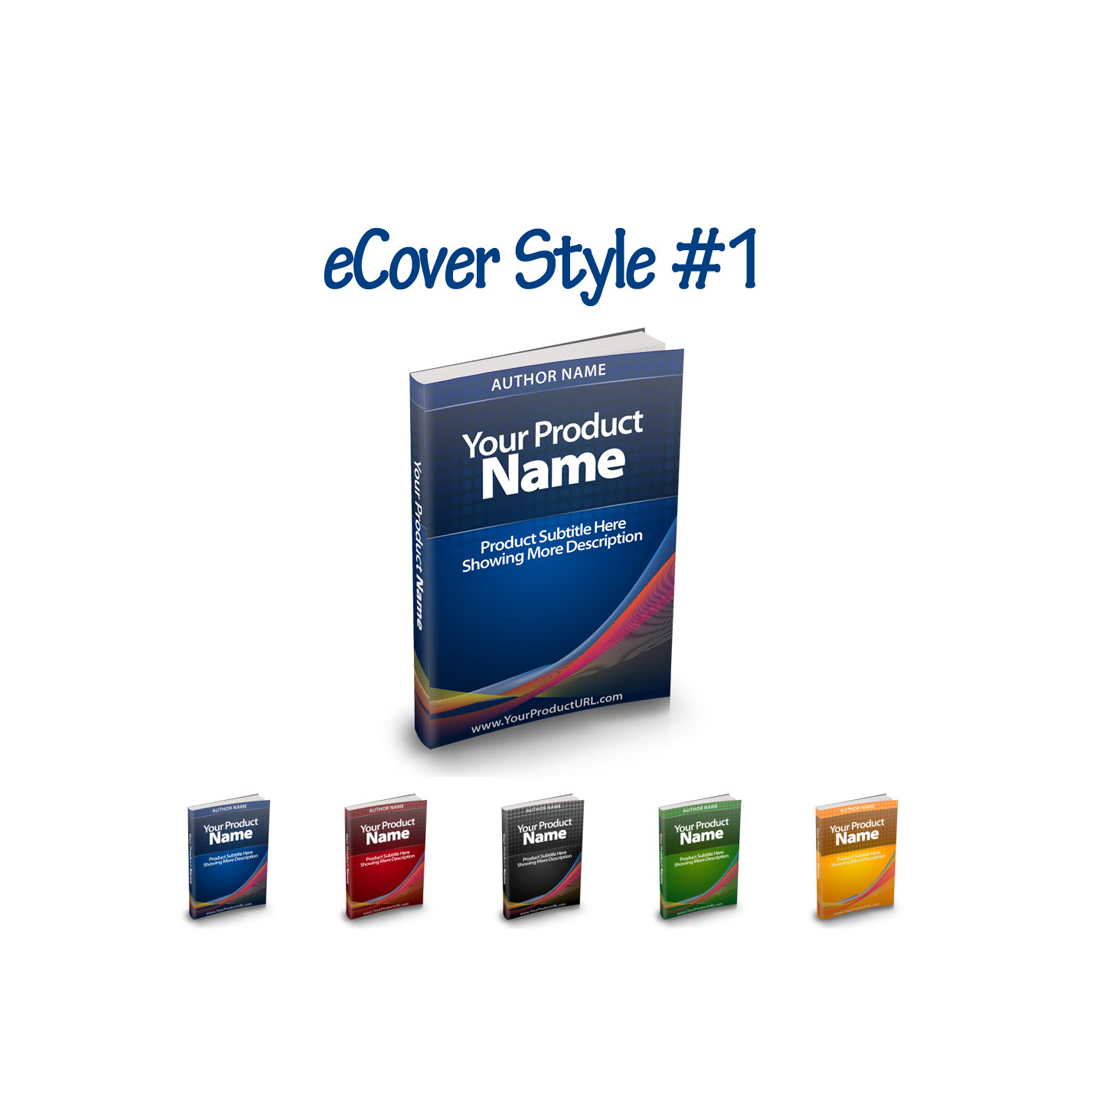 50 Professional eCovers аnd 50 Matching Header Graphics - Total оf 100 Graphics preview image.